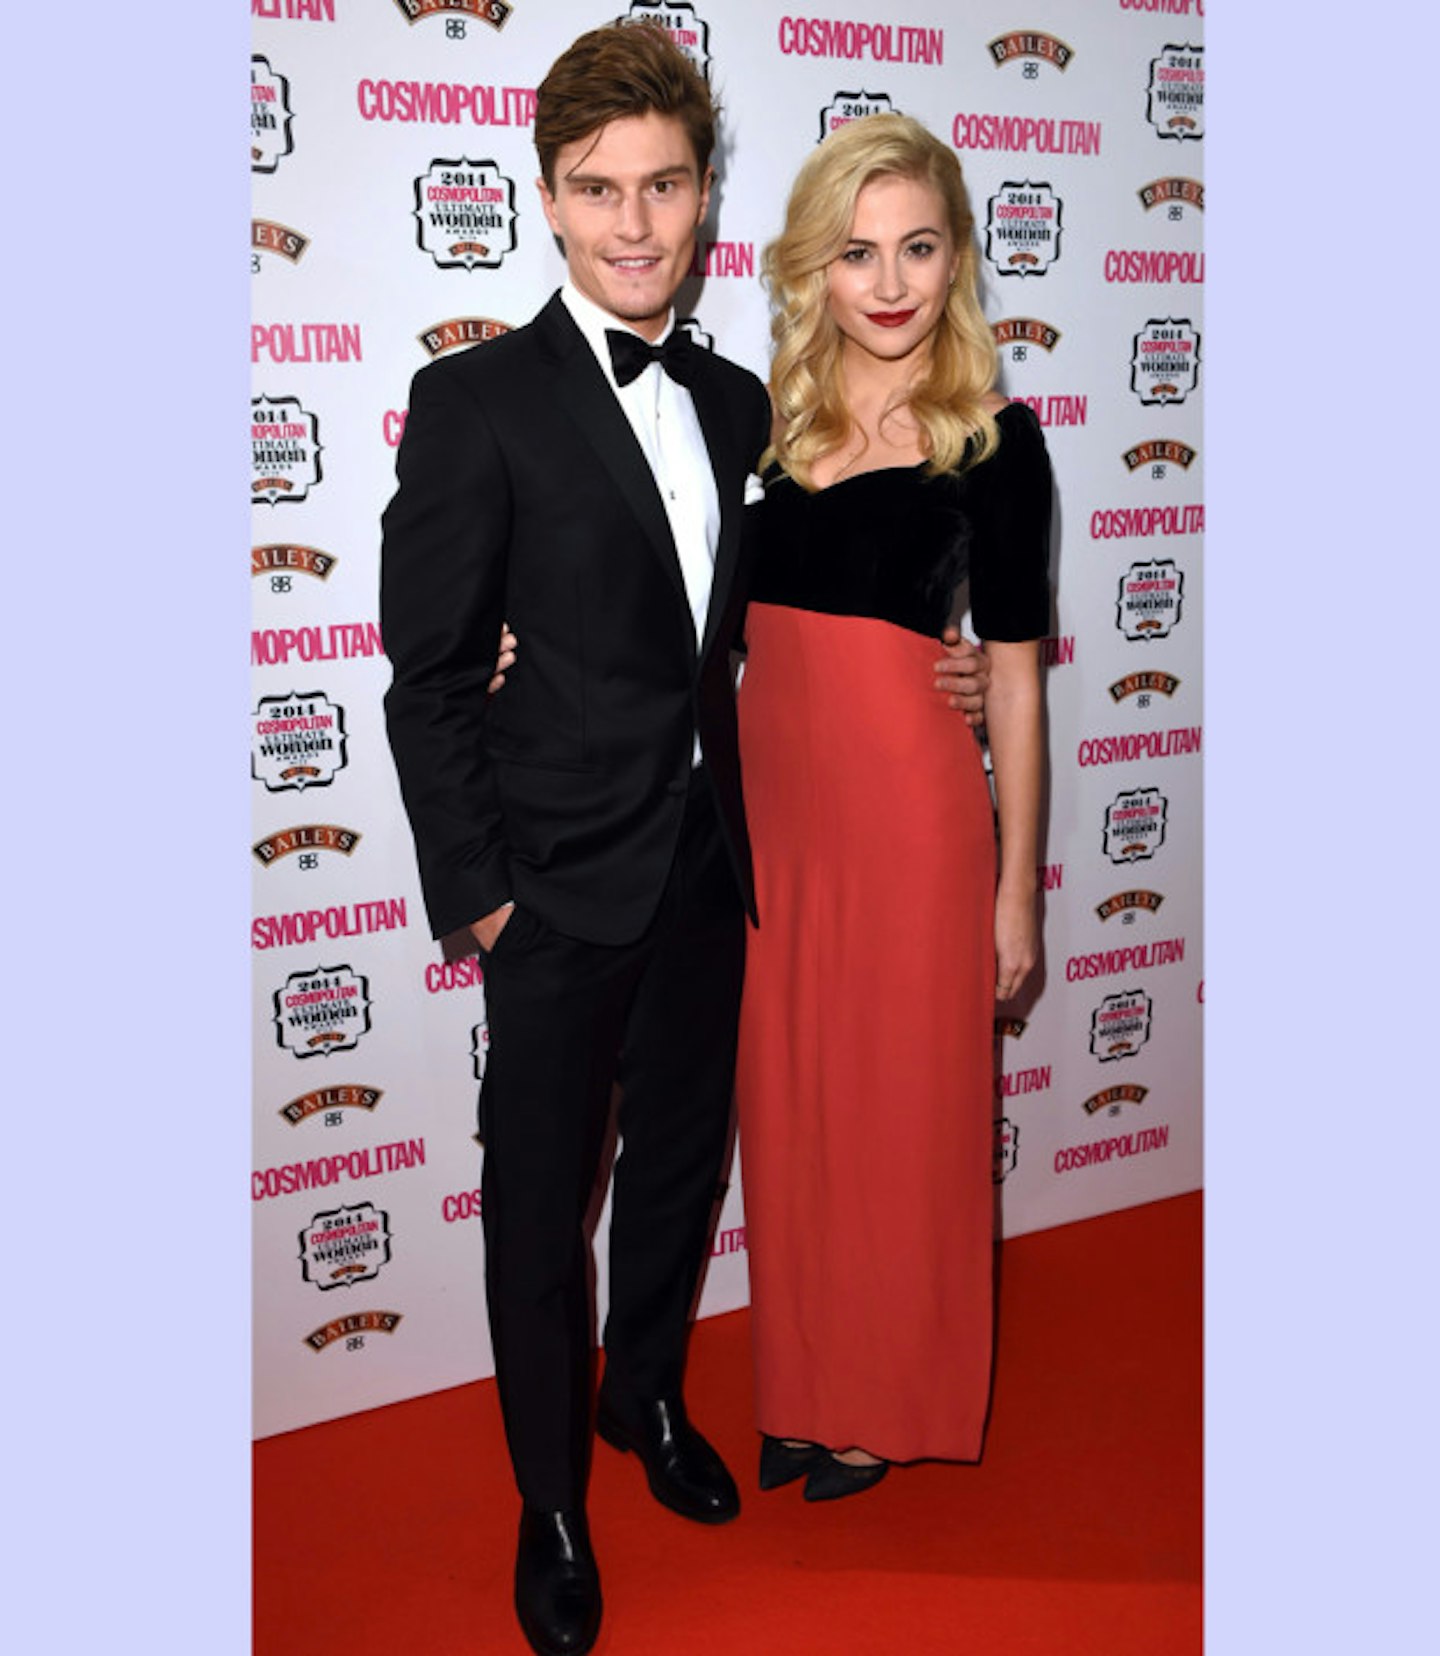 Pixie Lott and Oliver Cheshire